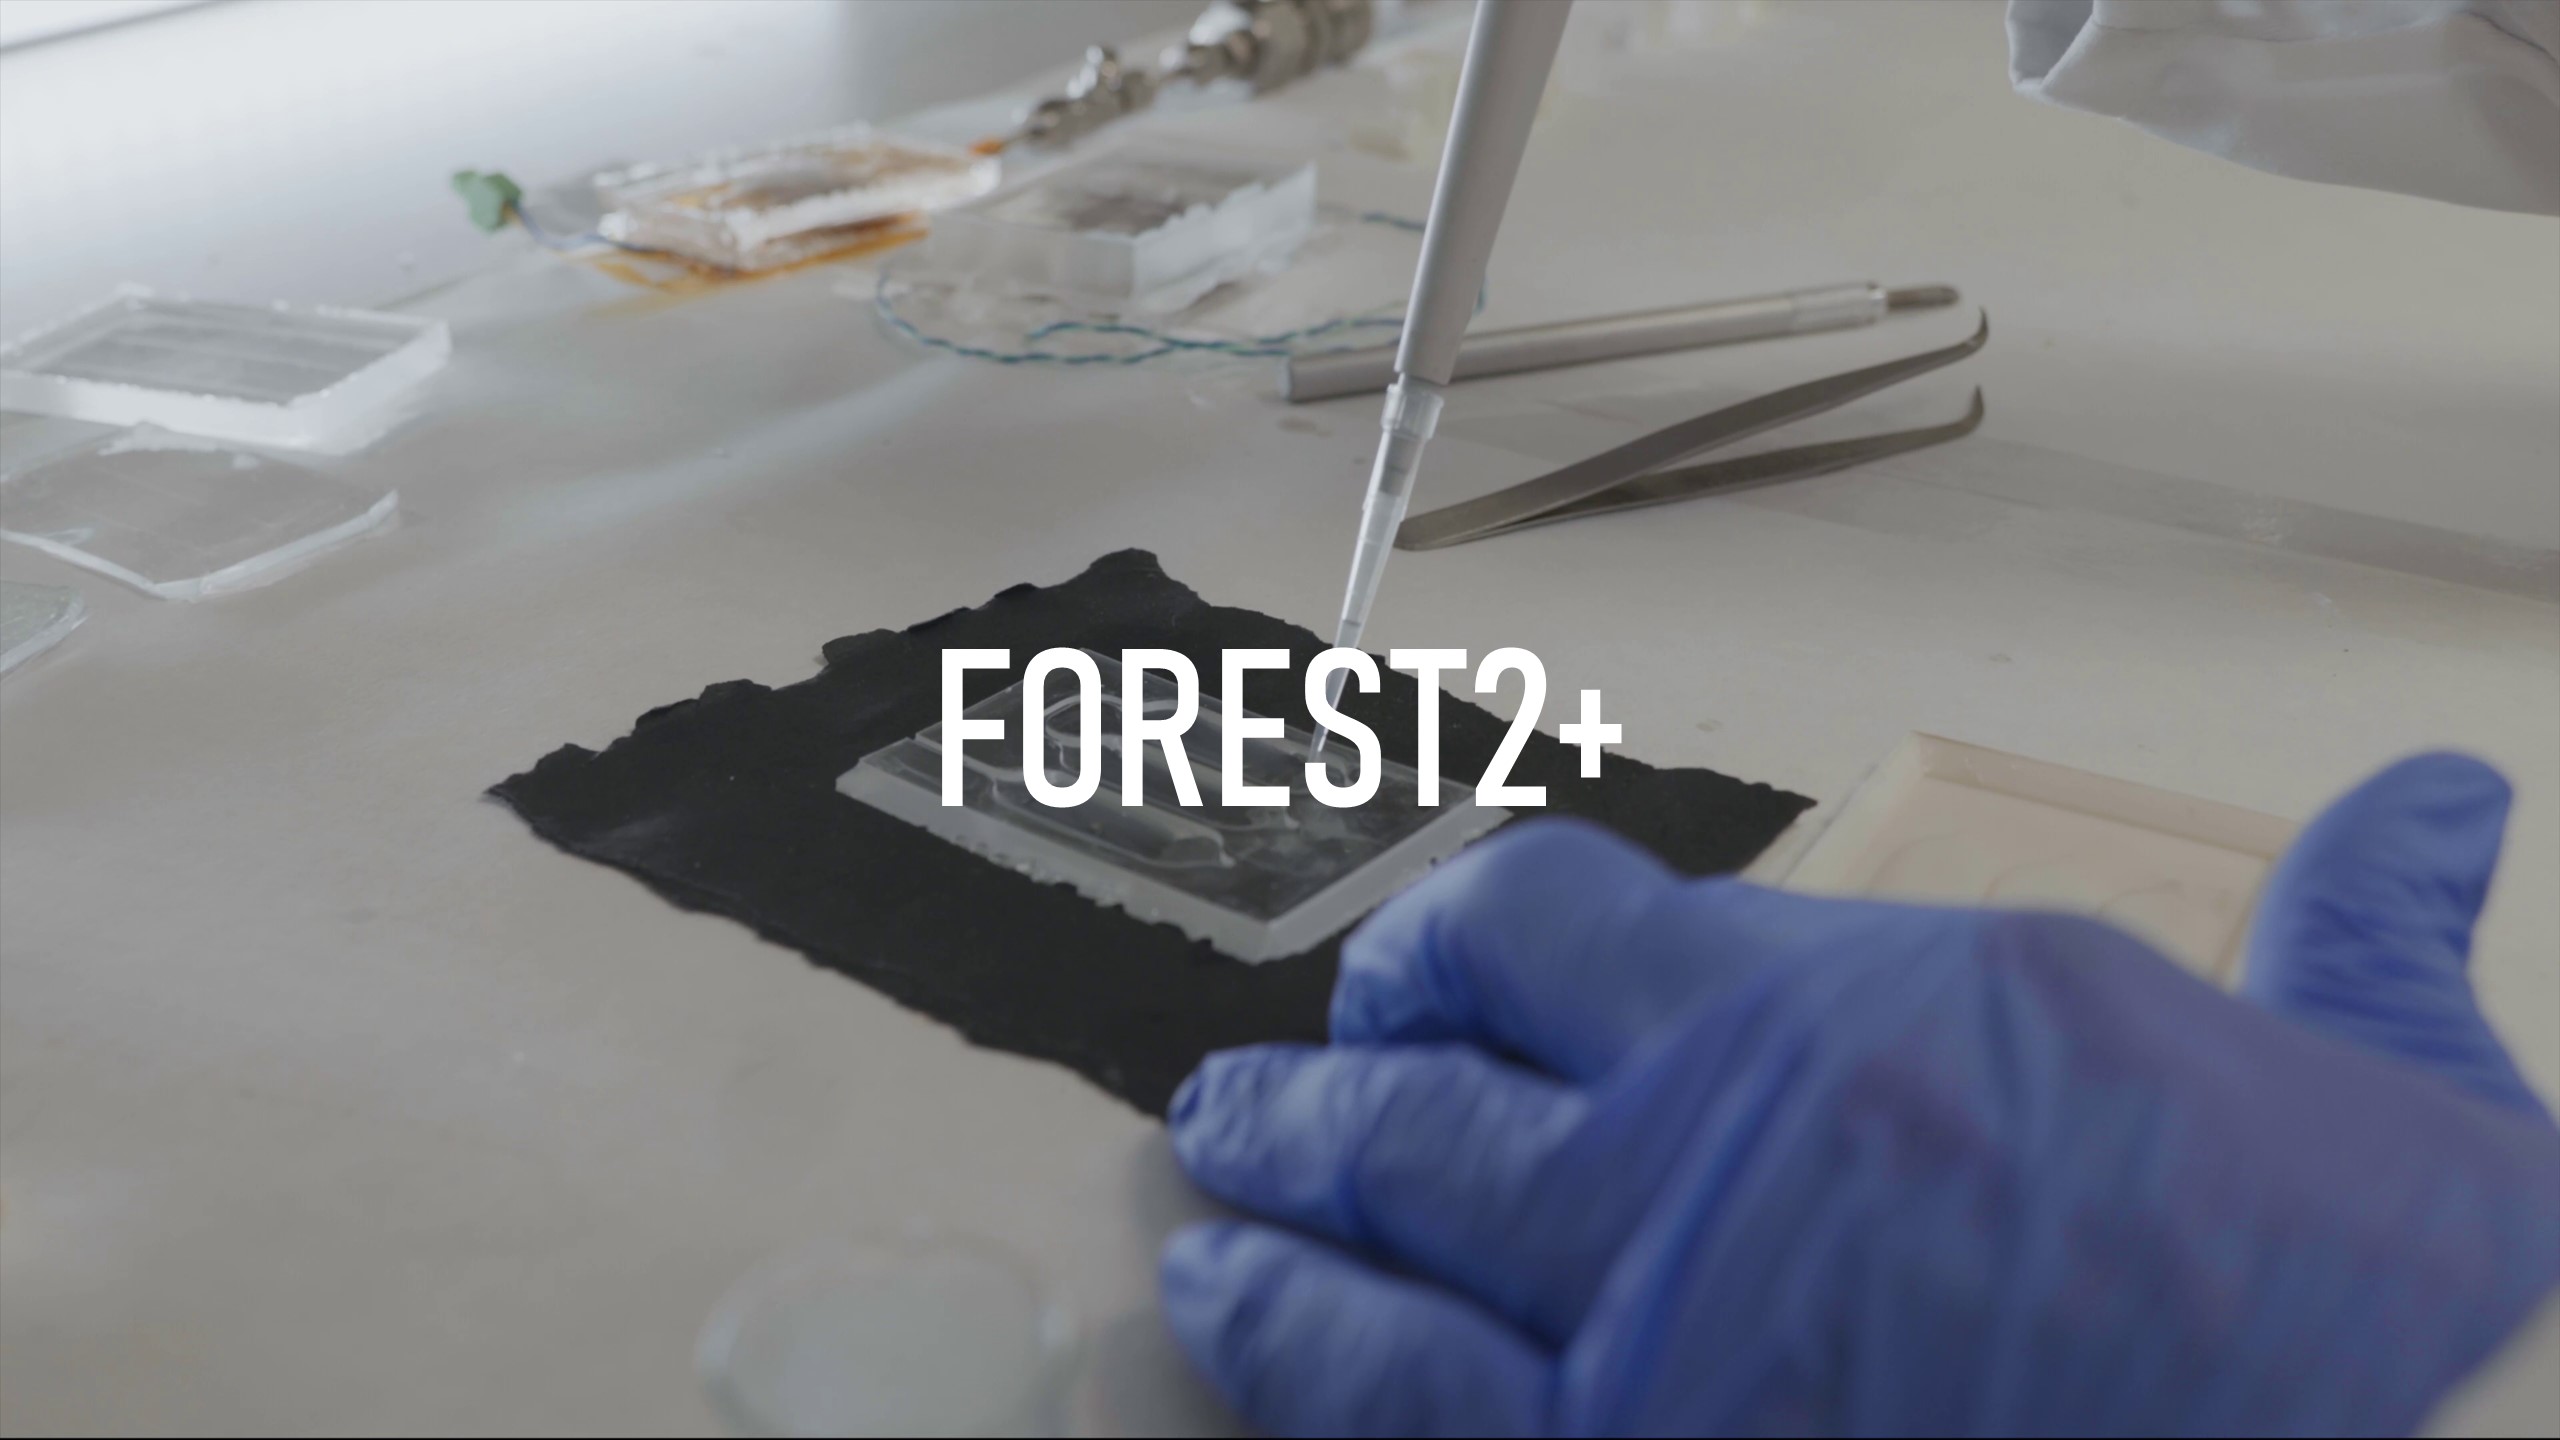 Proyecto colaborativo Forest2+